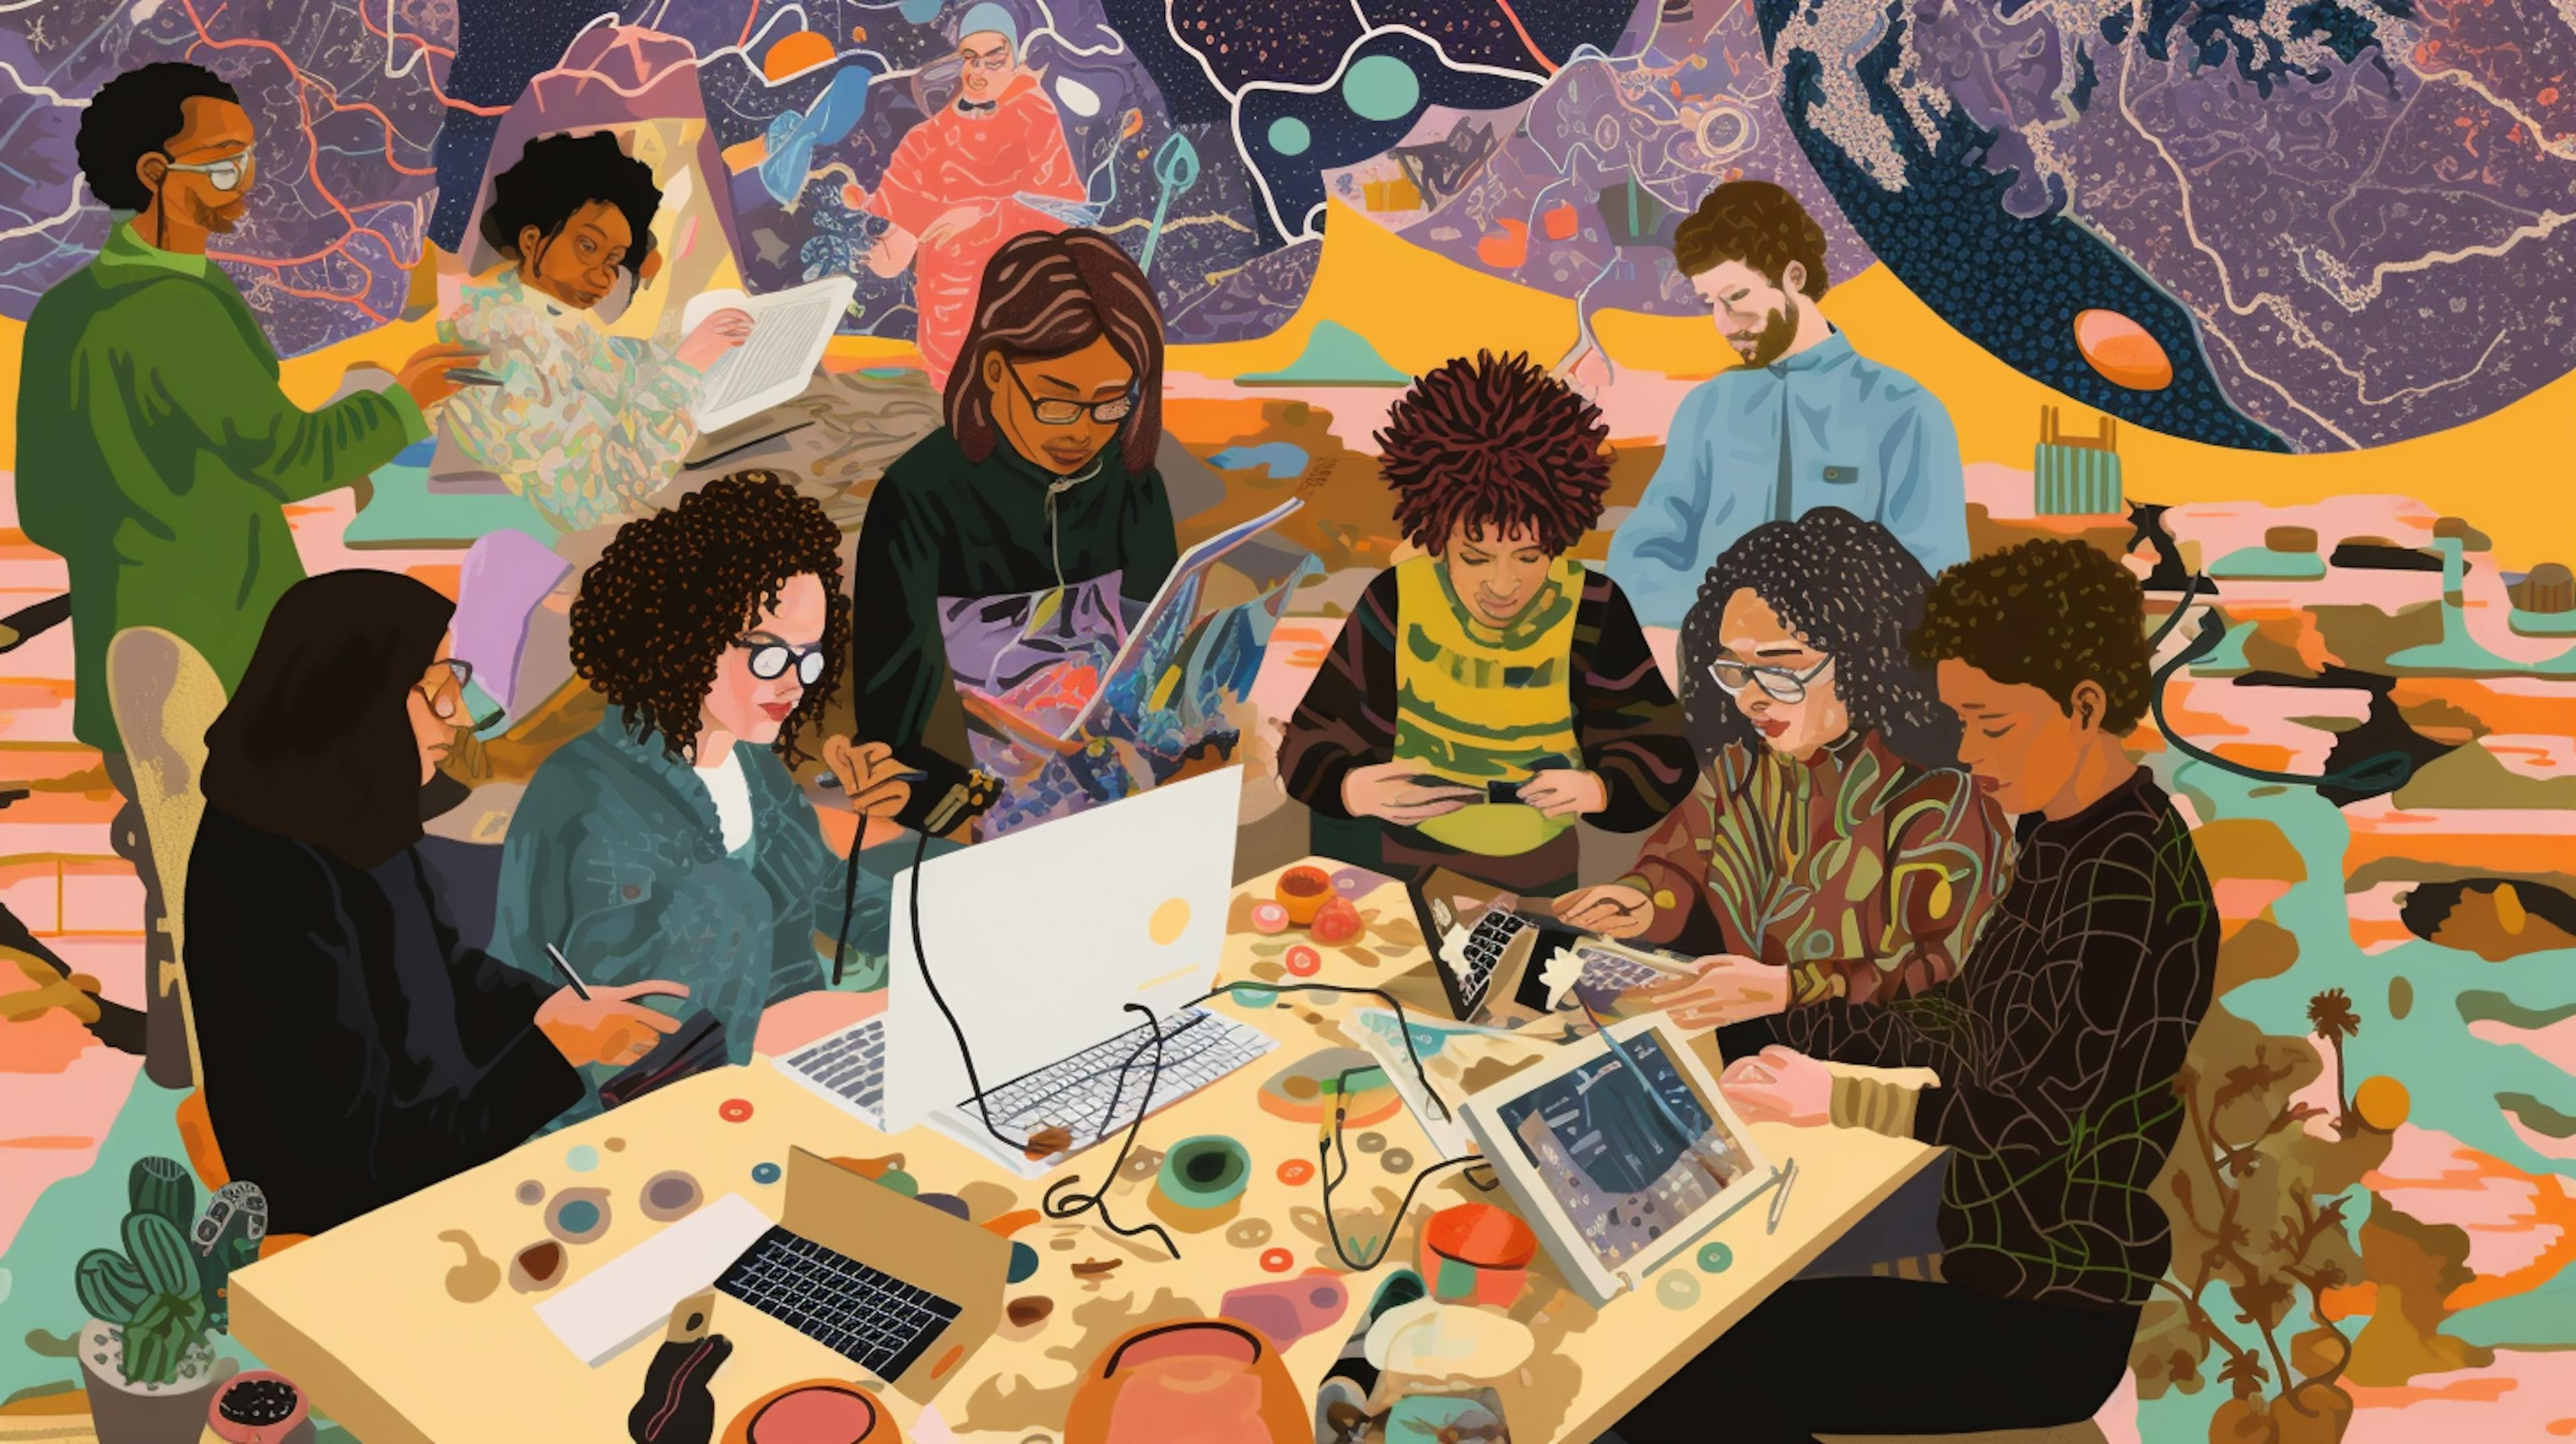 image of a whimsical painting of a diverse group of people sitting around a table working on a product design. colorful, playful, and fun